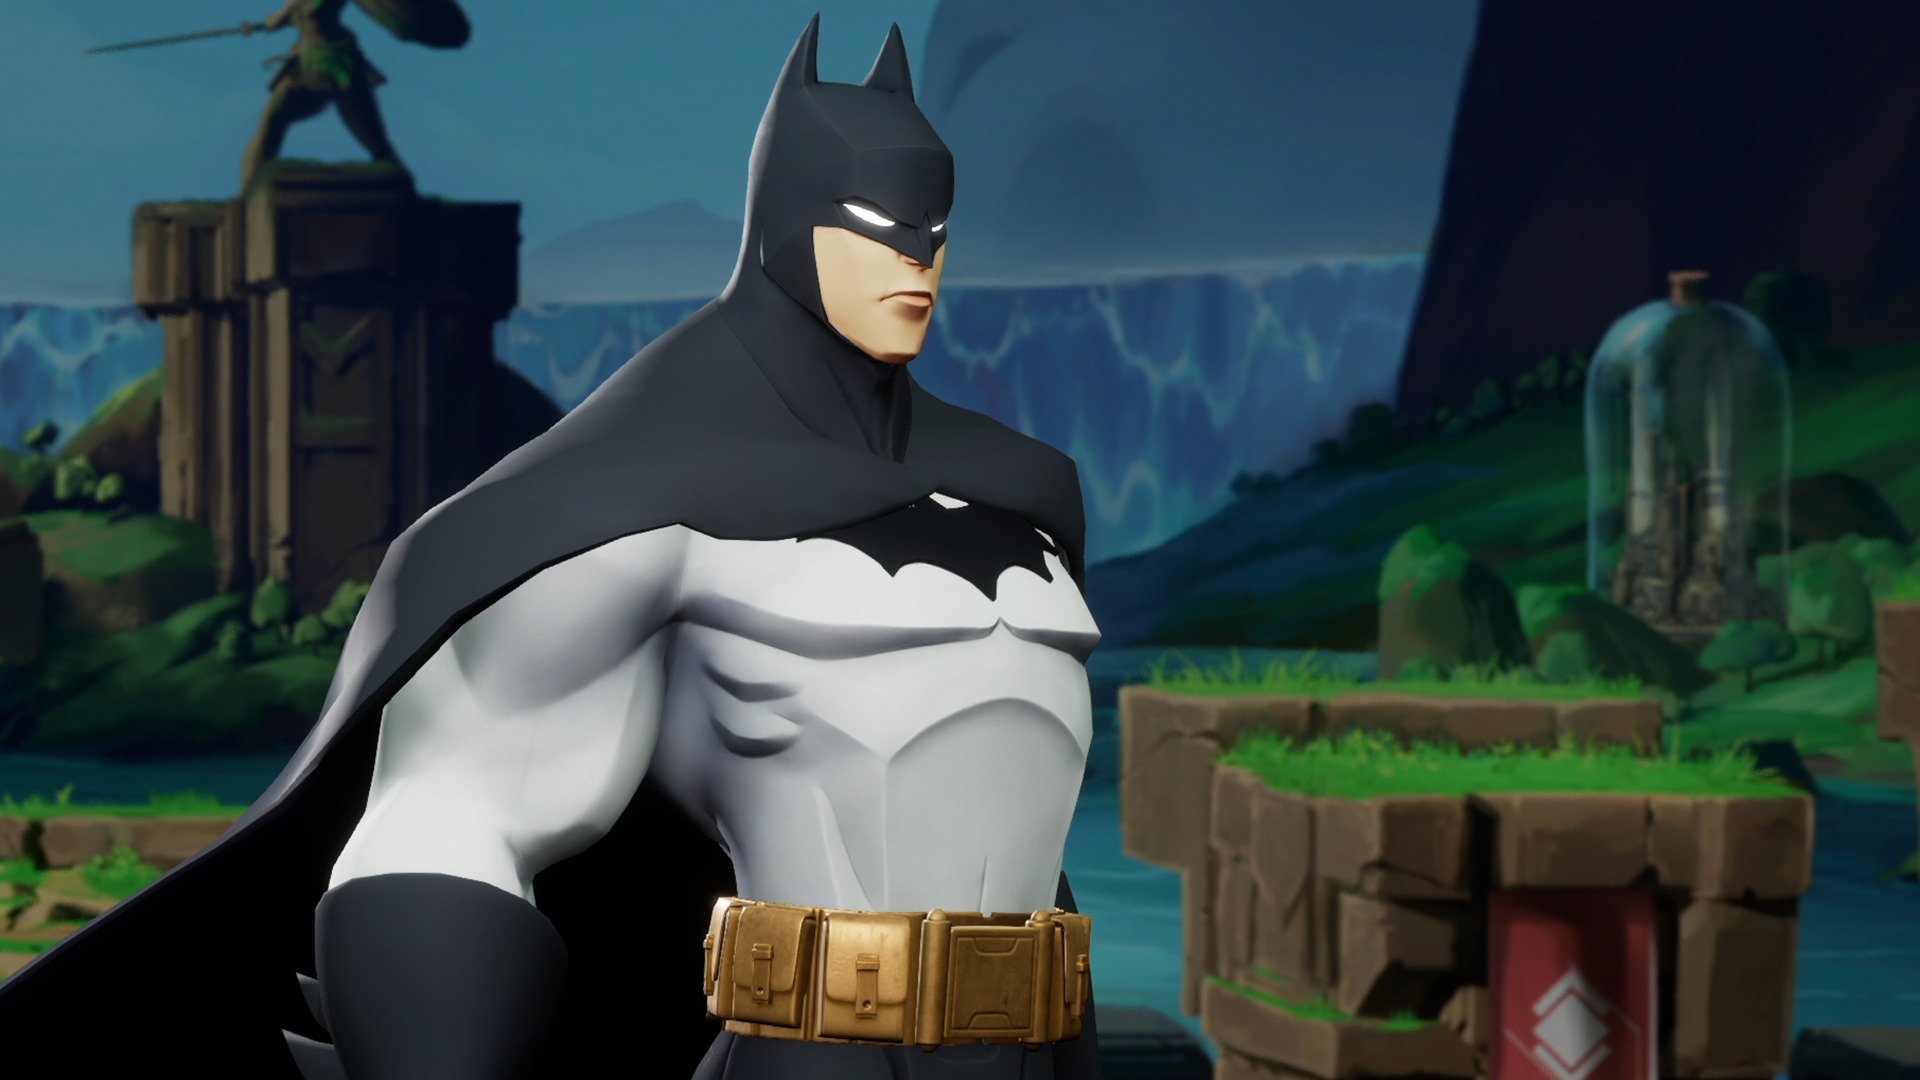 Kevin Conroy screenshots, images and pictures - Giant Bomb